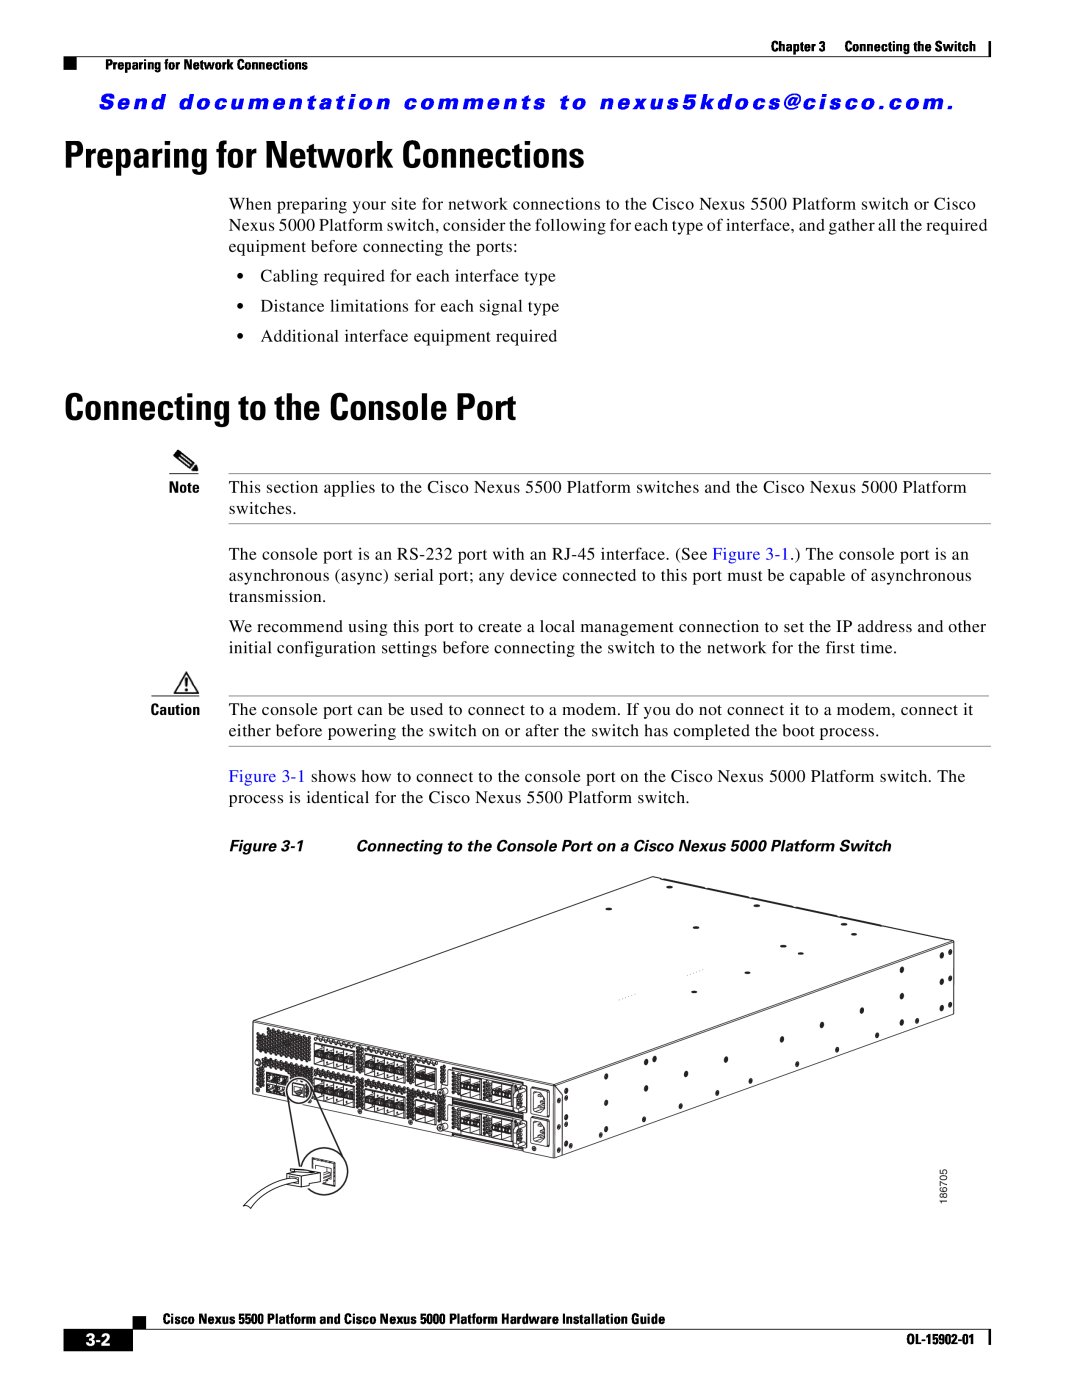 Cisco Systems 5000 manual Preparing for Network Connections, Connecting to the Console Port 